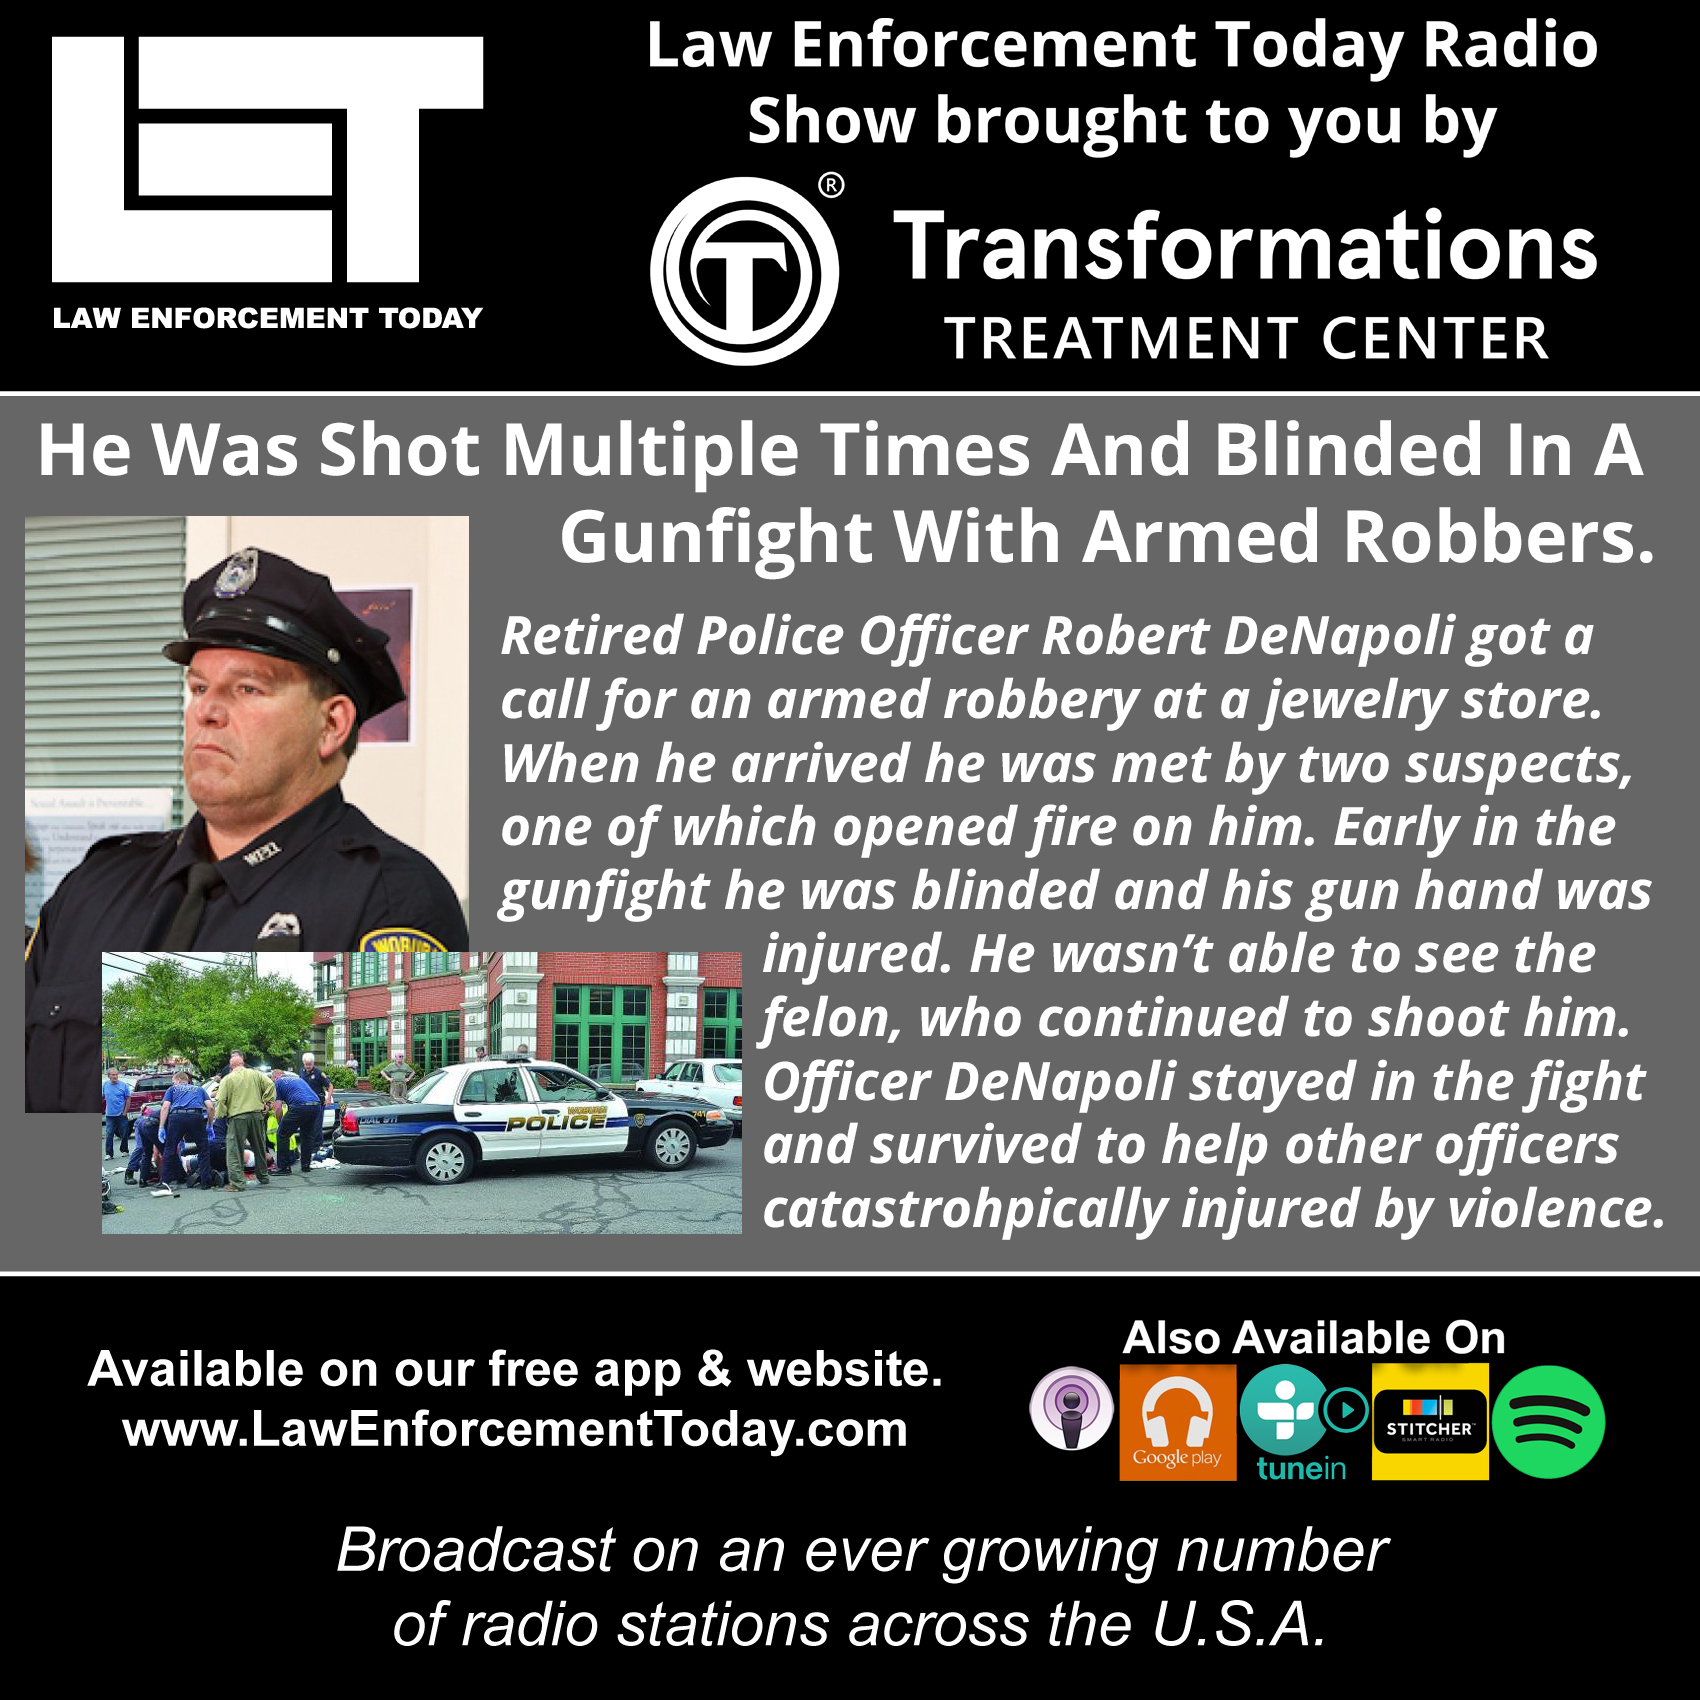 S3E40: Shot Many Times And Blinded During A Gunfight, Retired Police Officer Robert DeNapoli